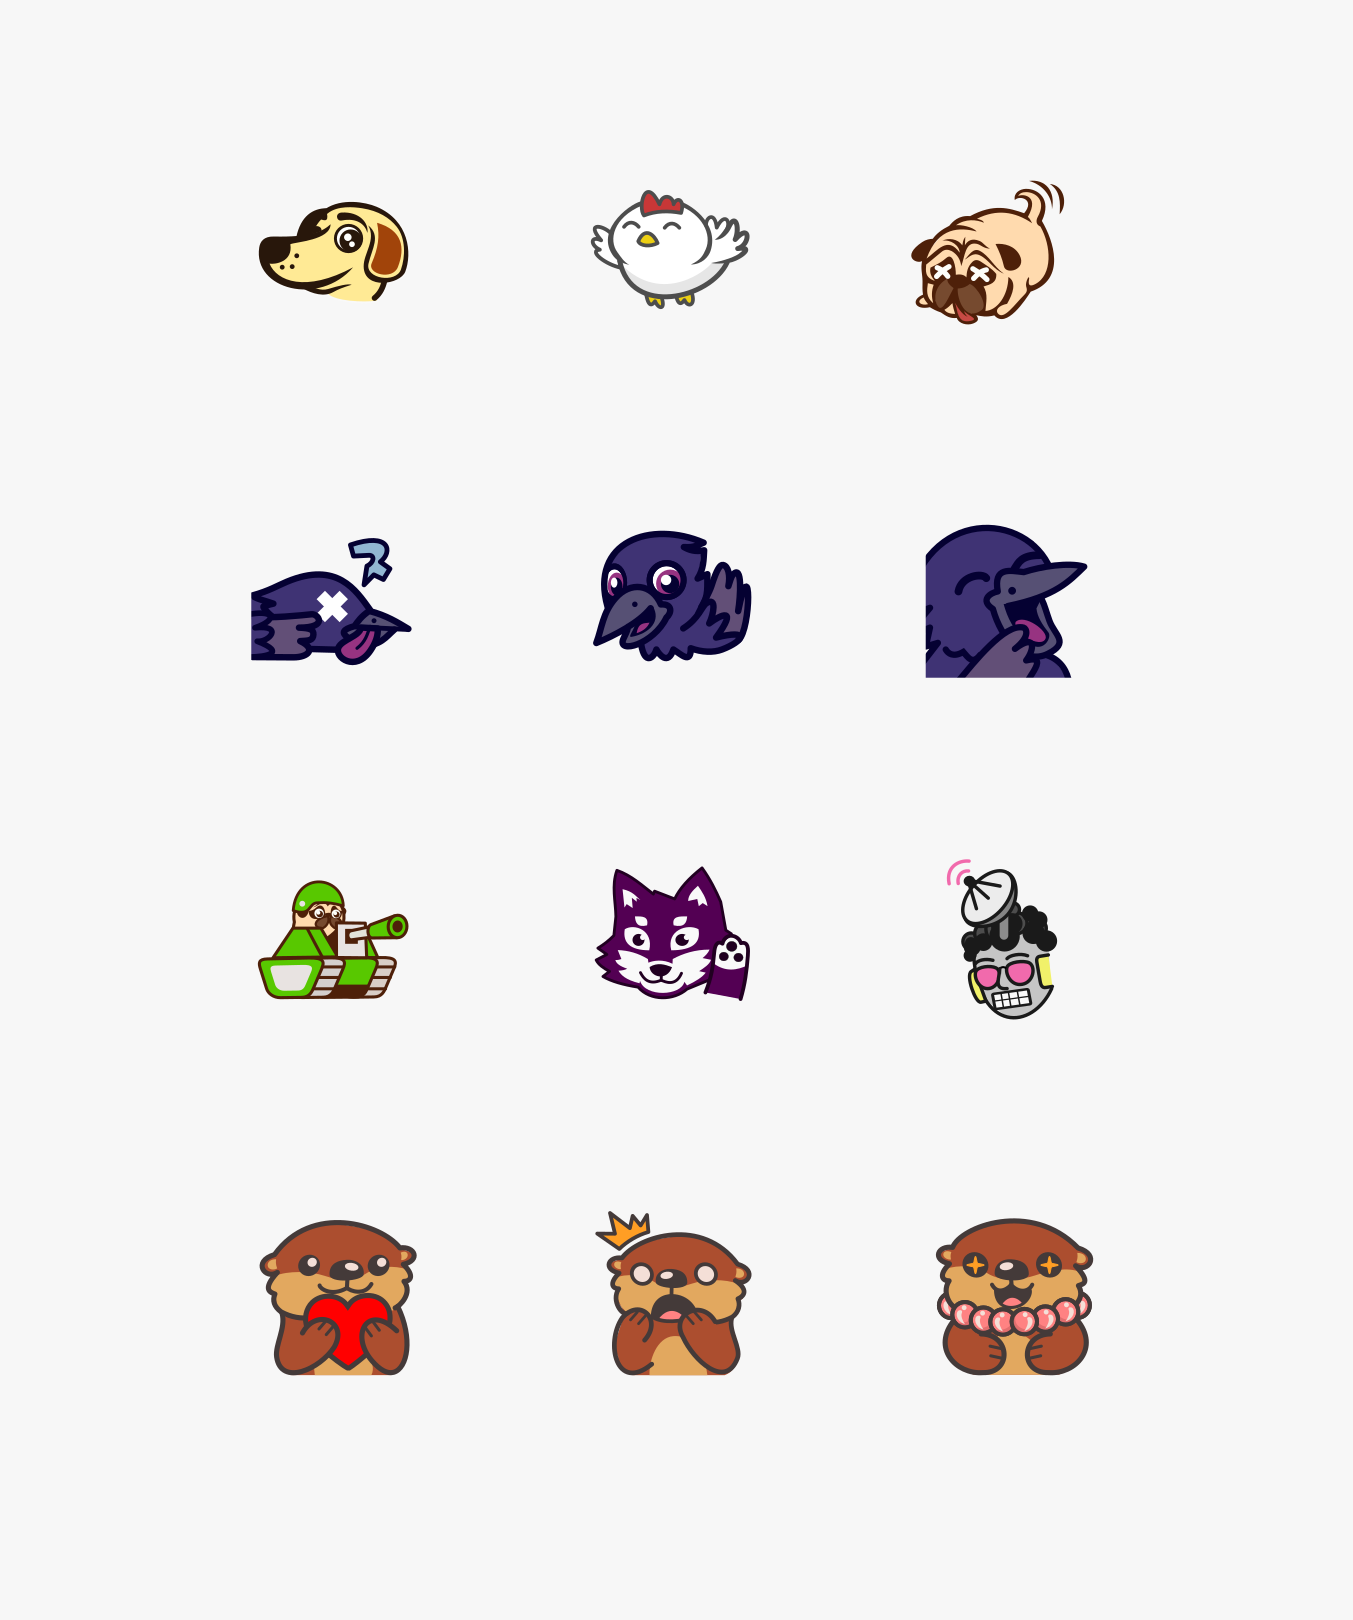 Twitch emotes for various streamers. Designed by Johnery